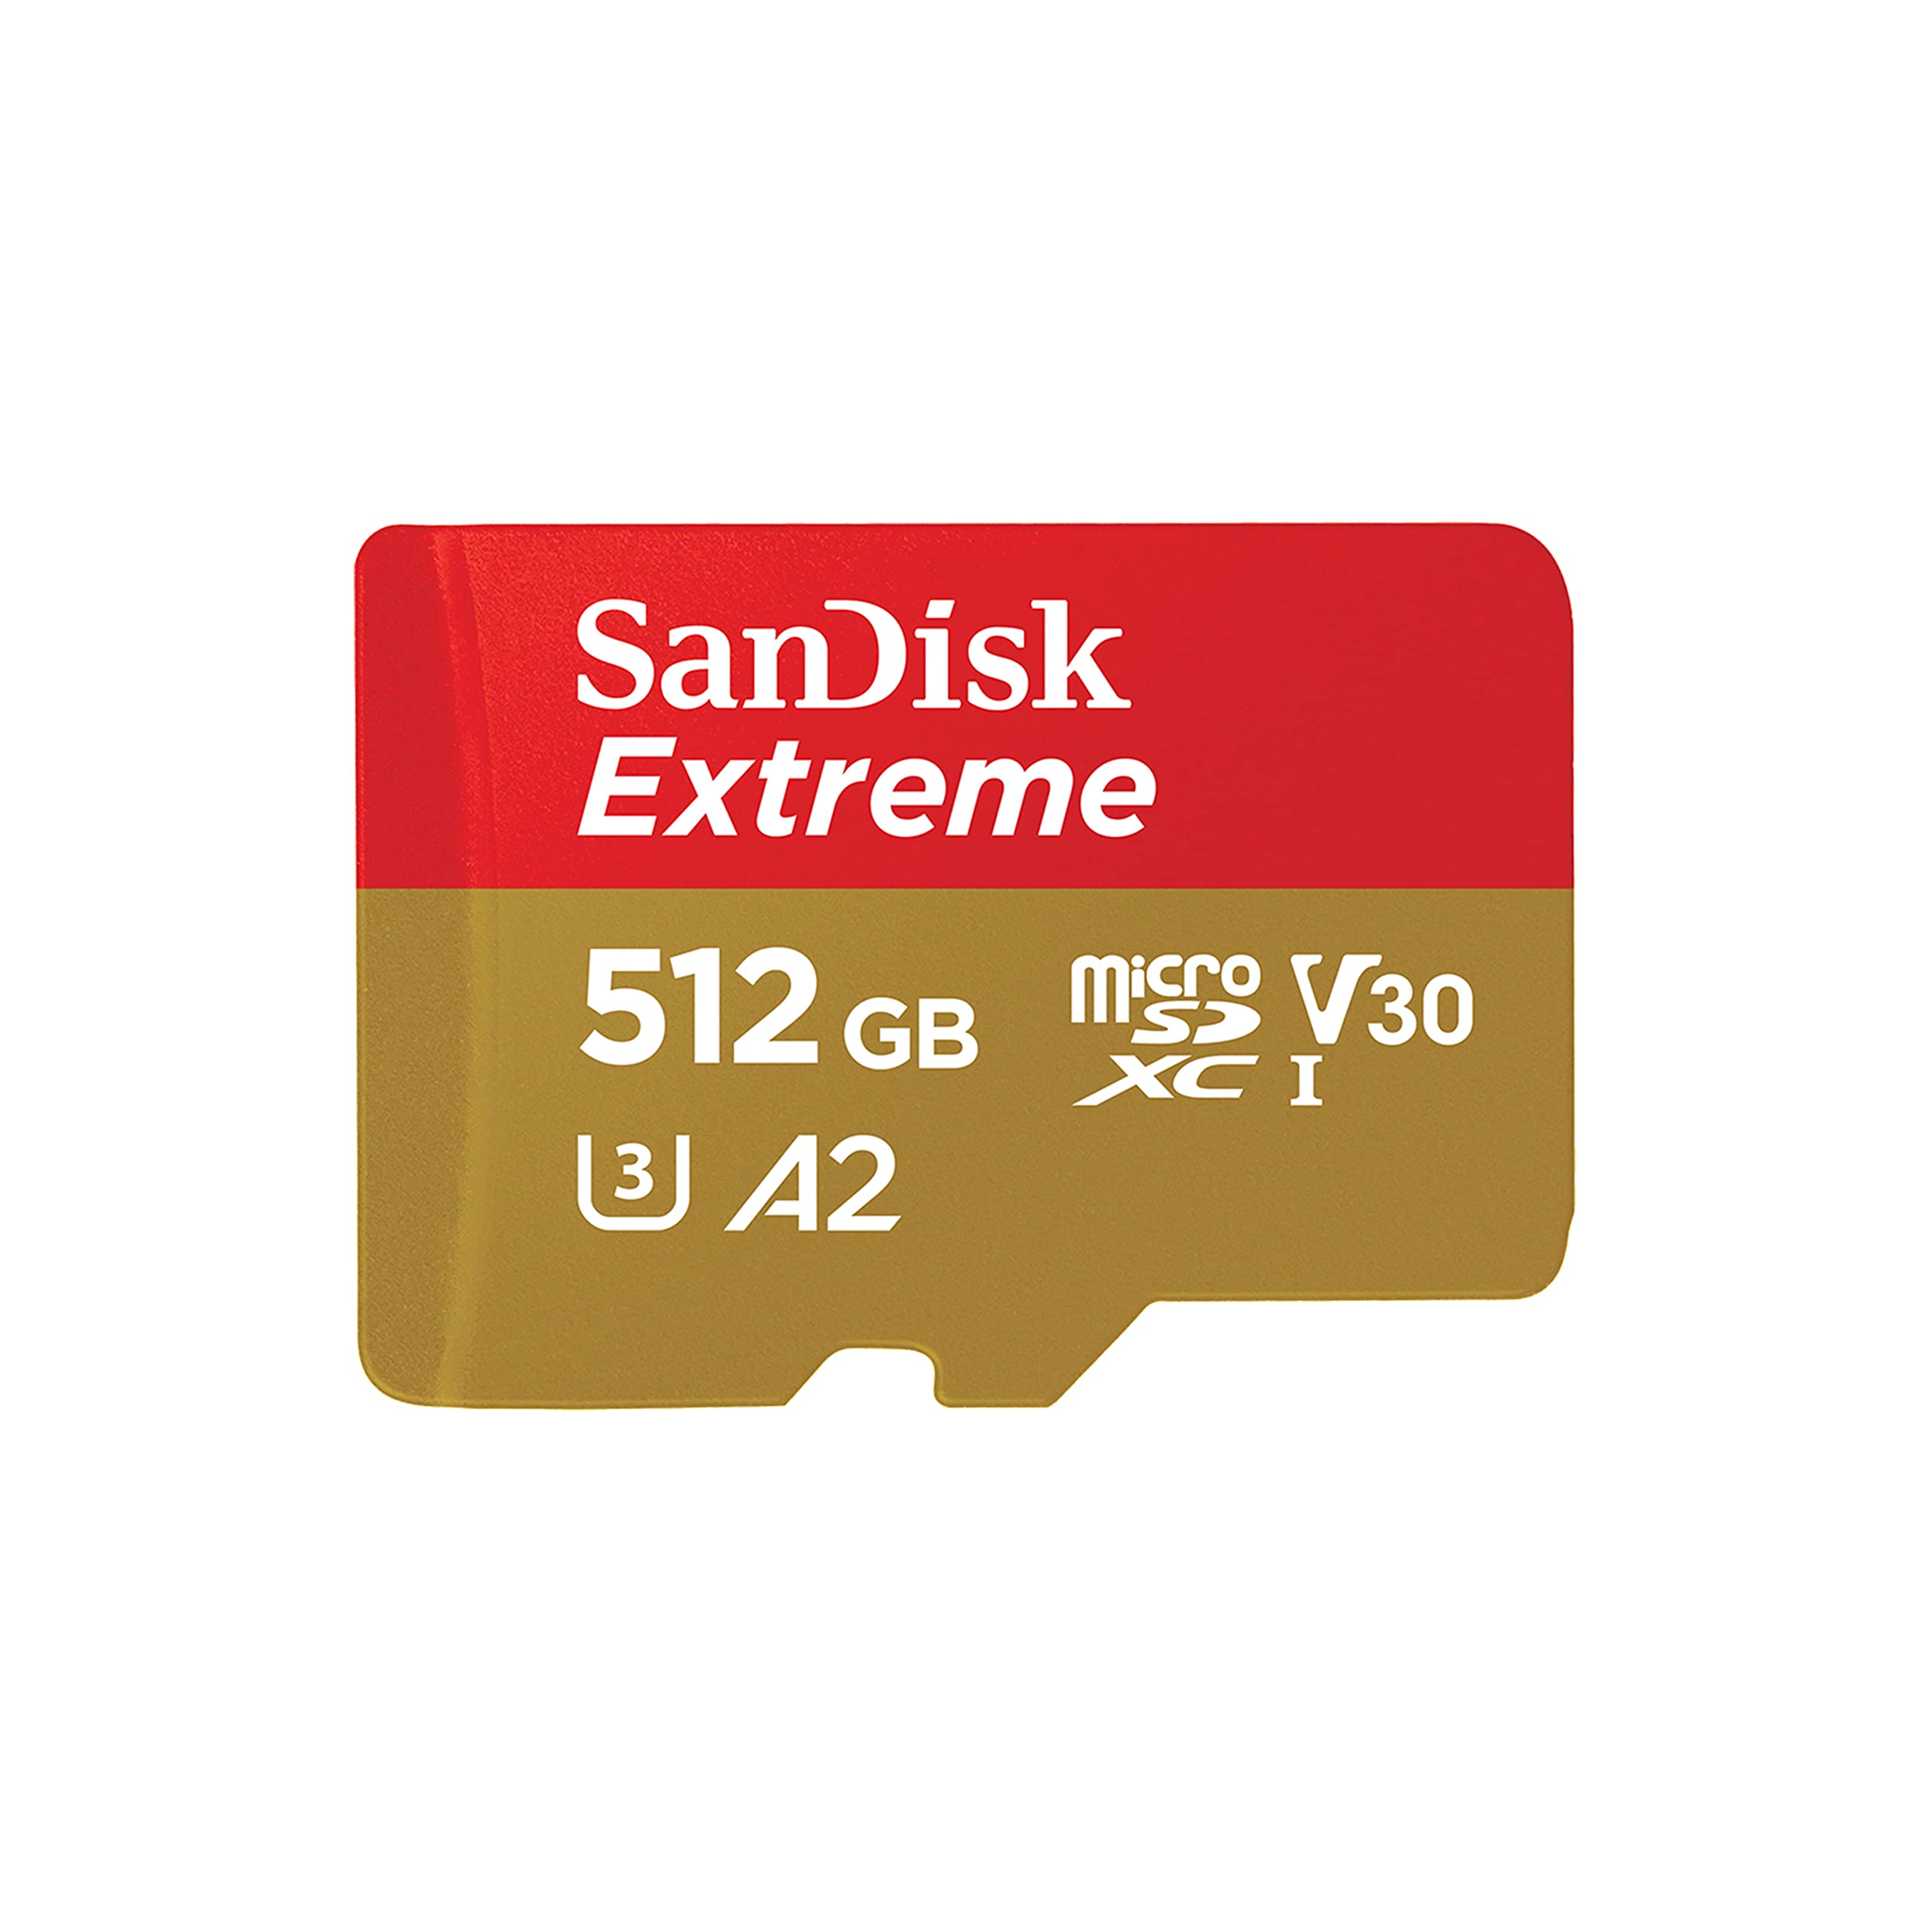 SanDisk 512GB Extreme microSDXC UHS-I Memory Card with Adapter - Up to 190MB/s $32.99